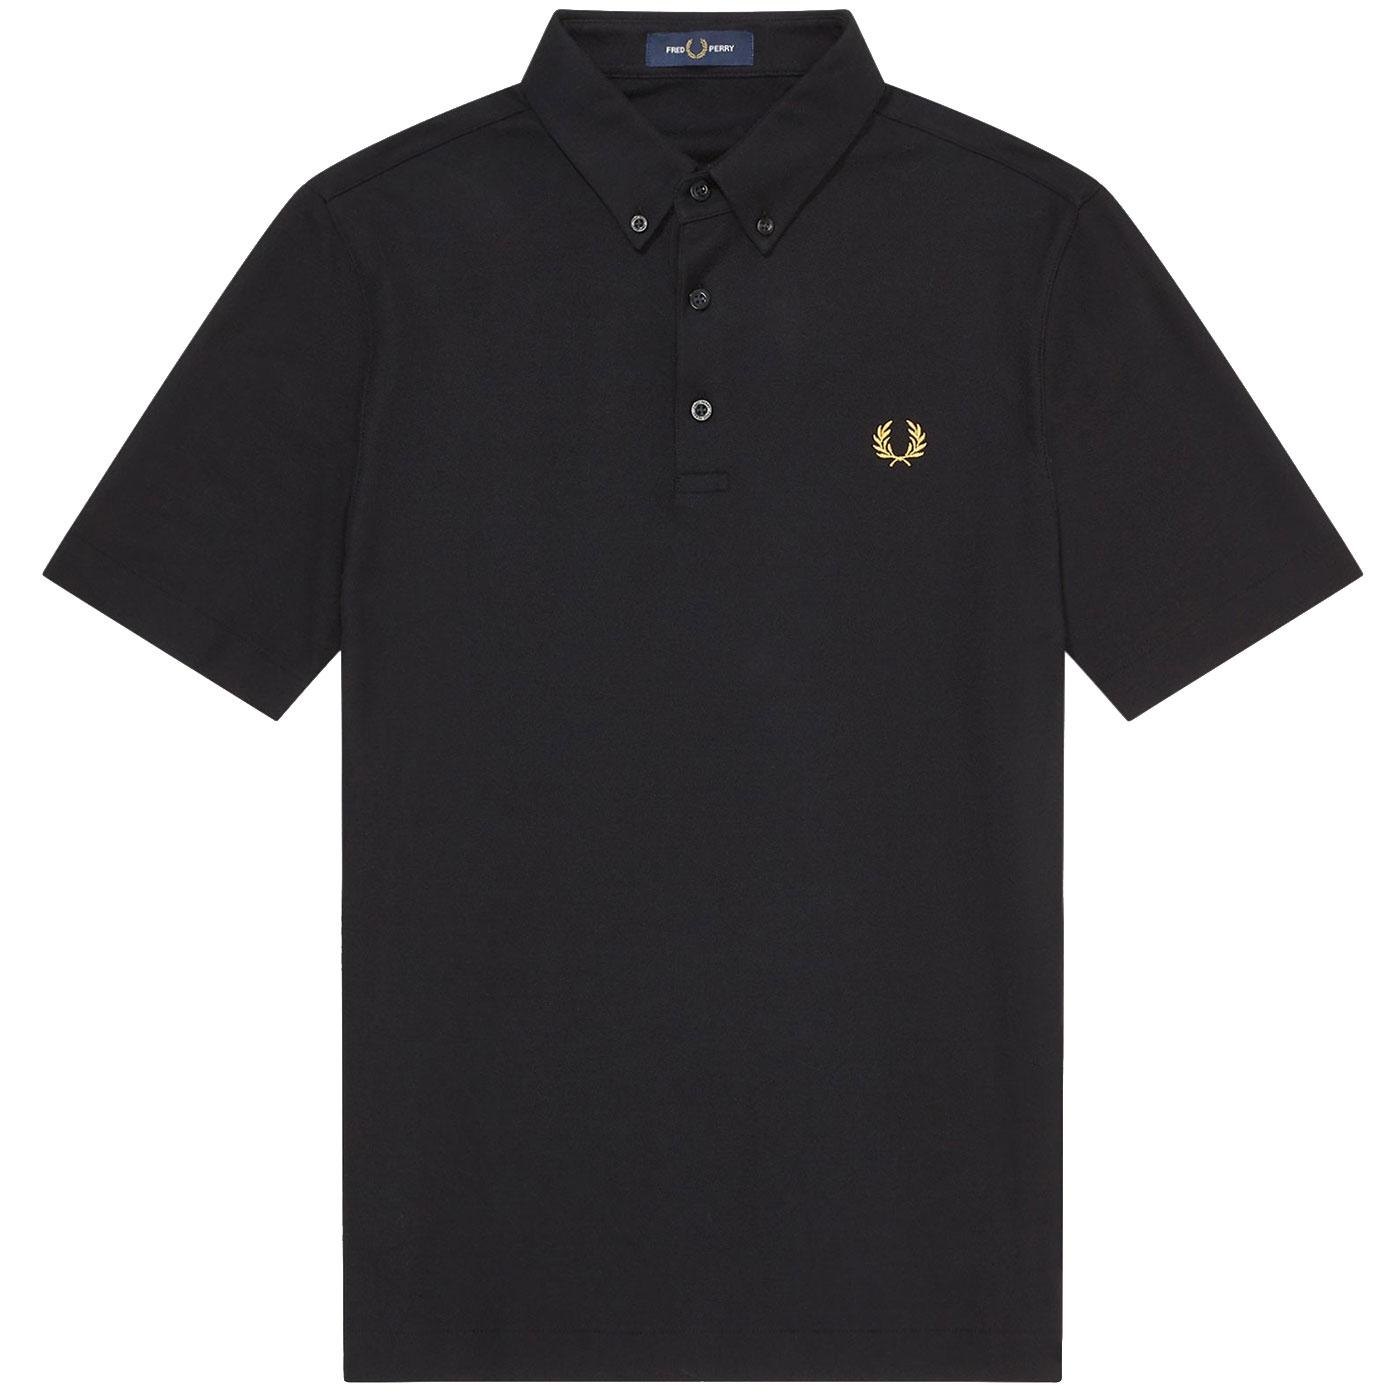 FRED PERRY Men's Button Down Pique Polo Shirt in Black